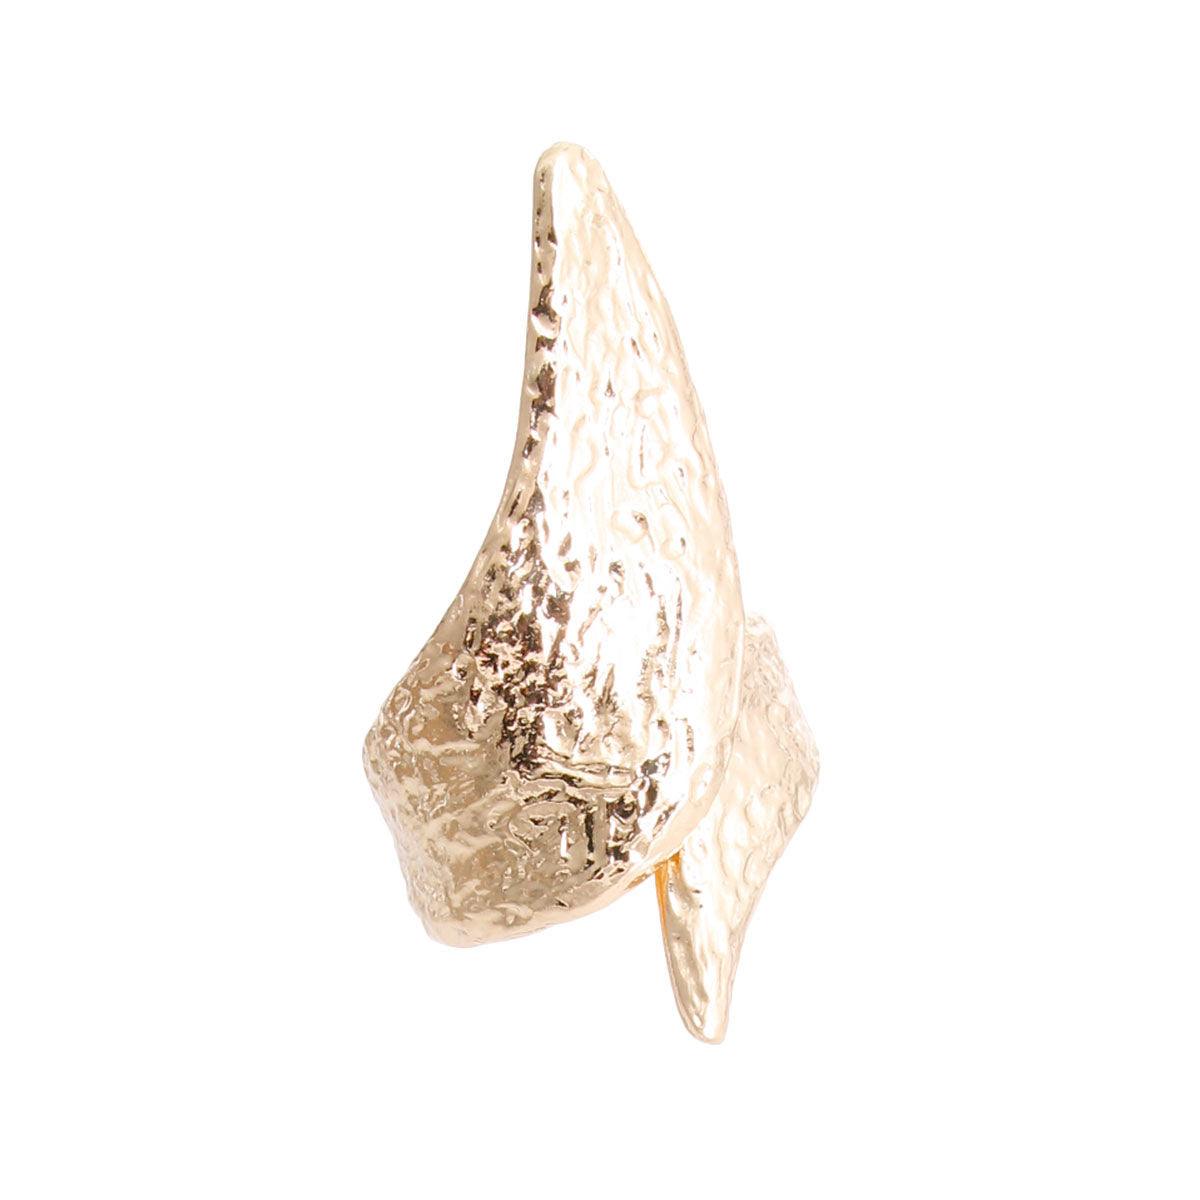 Bypass Hinge Cuff Bracelet: Hammered Gold Fashion Jewelry